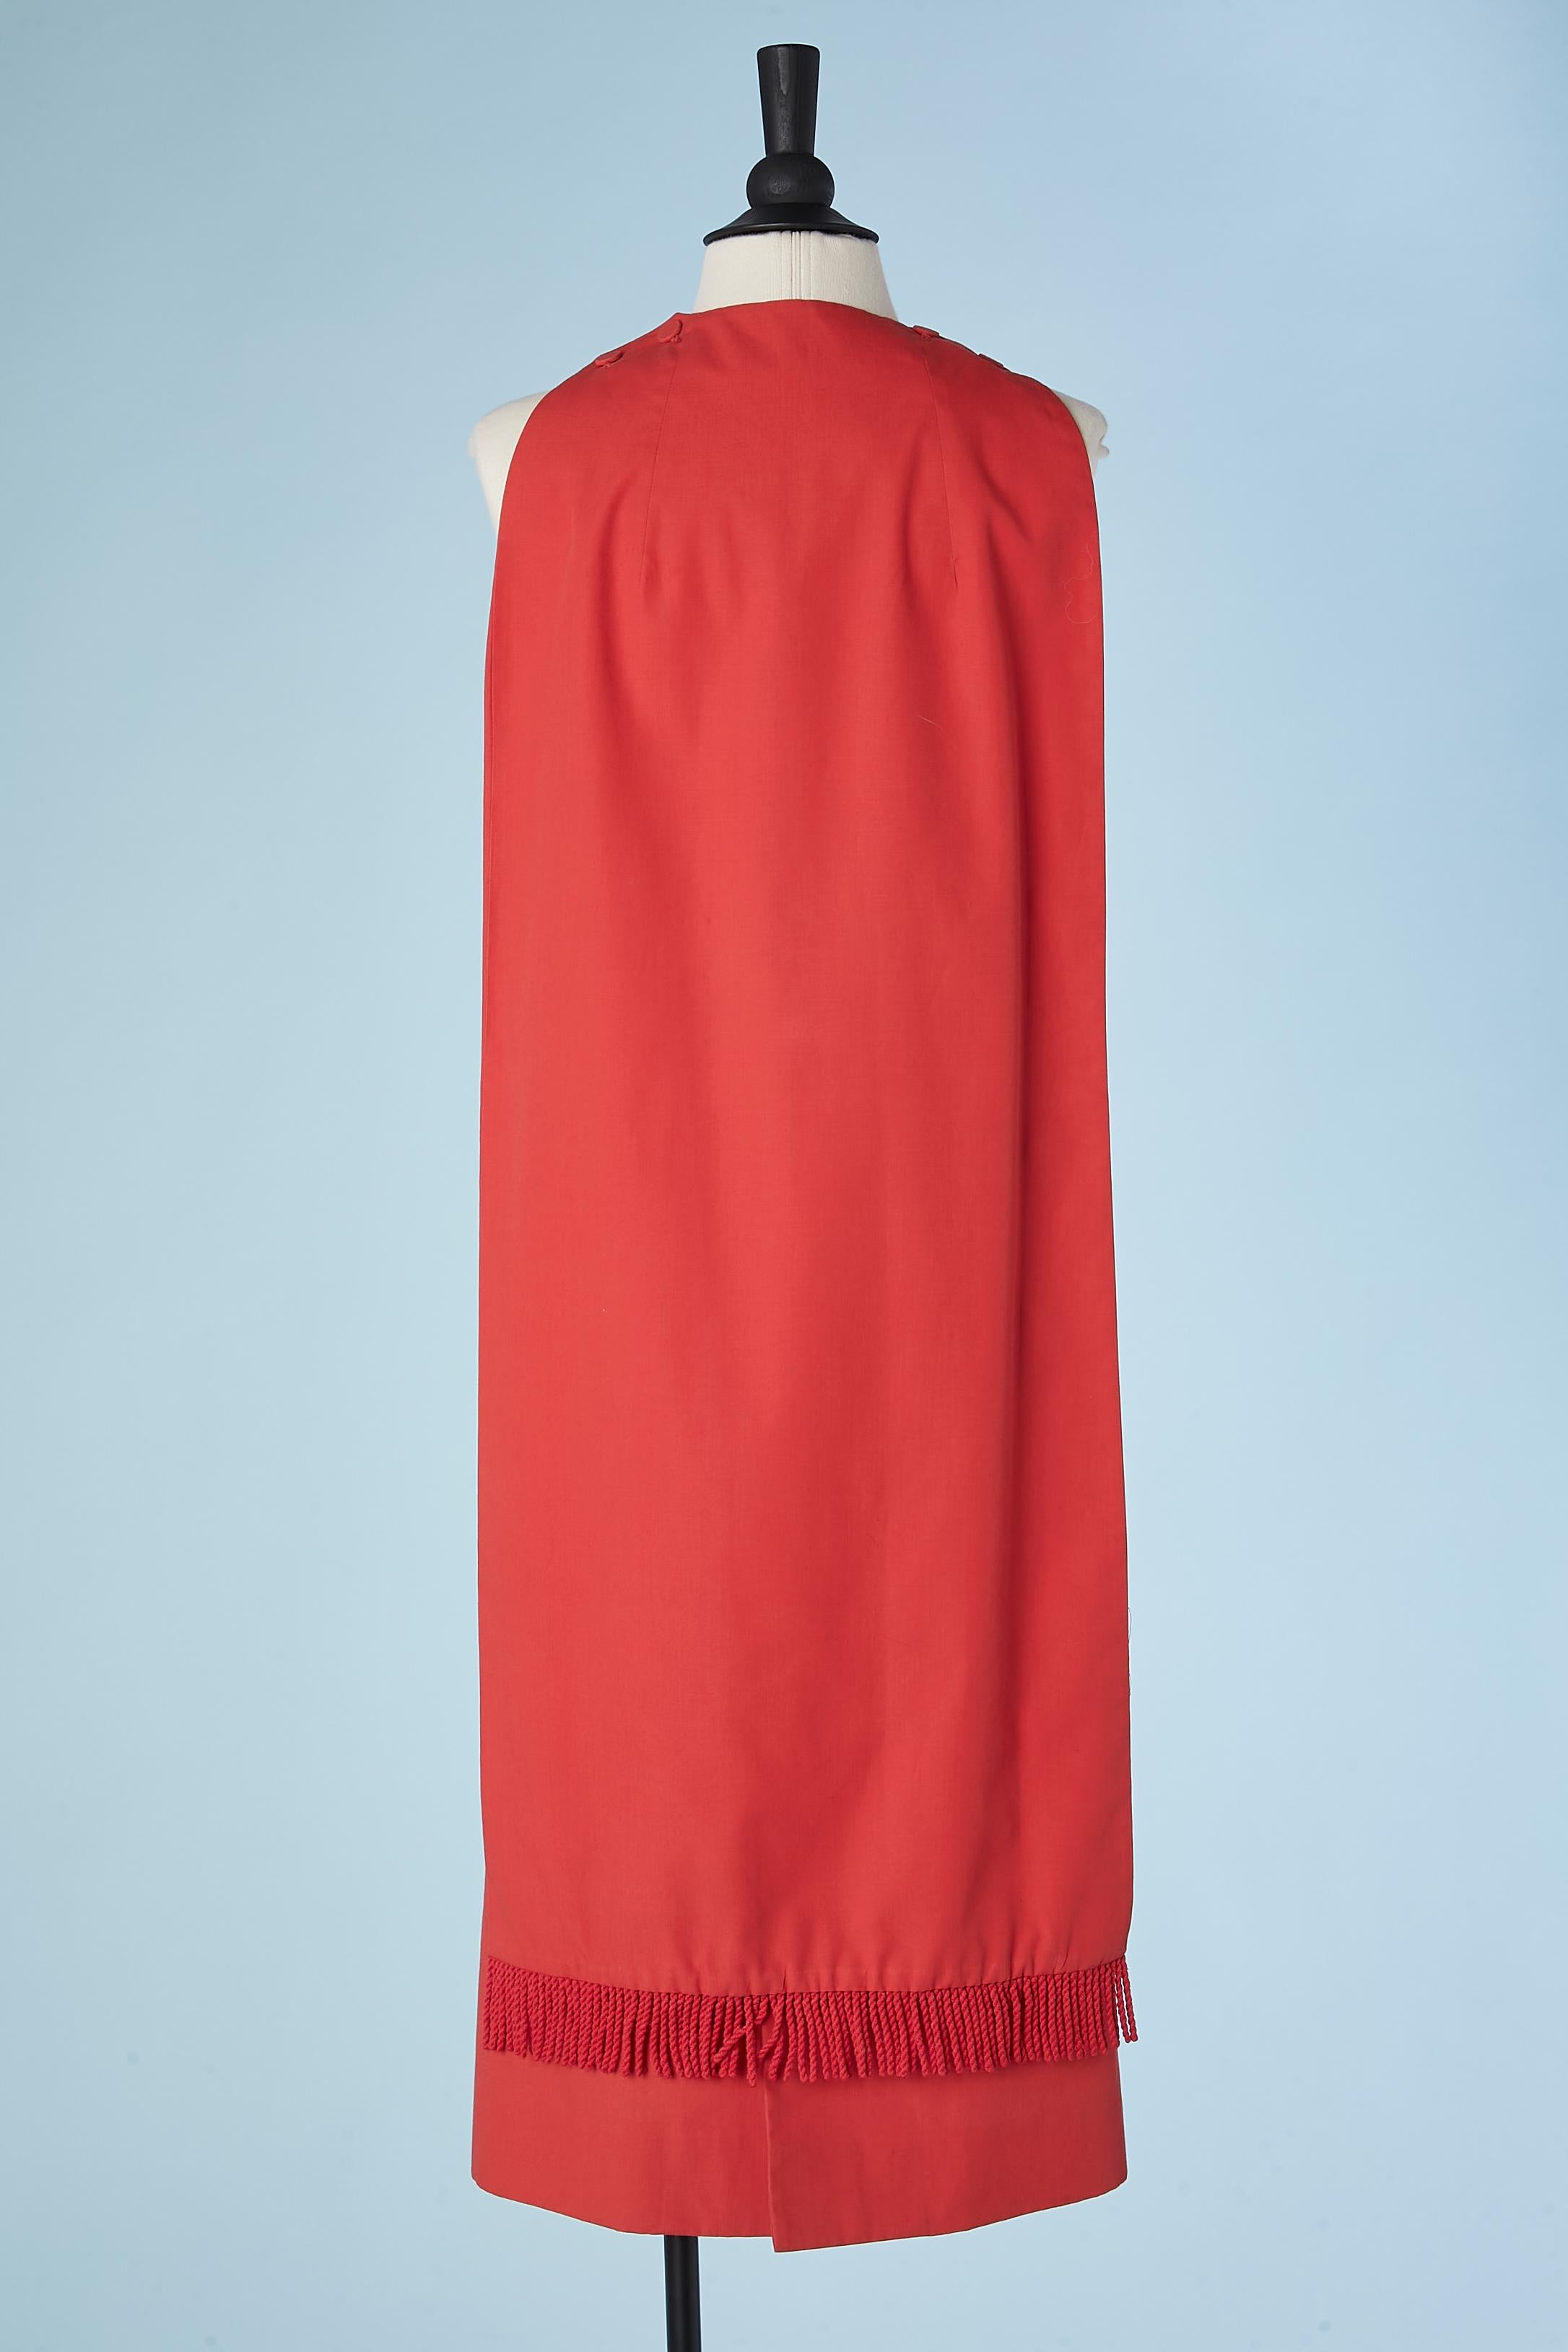 Women's Red cotton backless dress with detachable cape Jacques Heim Circa 1960's 